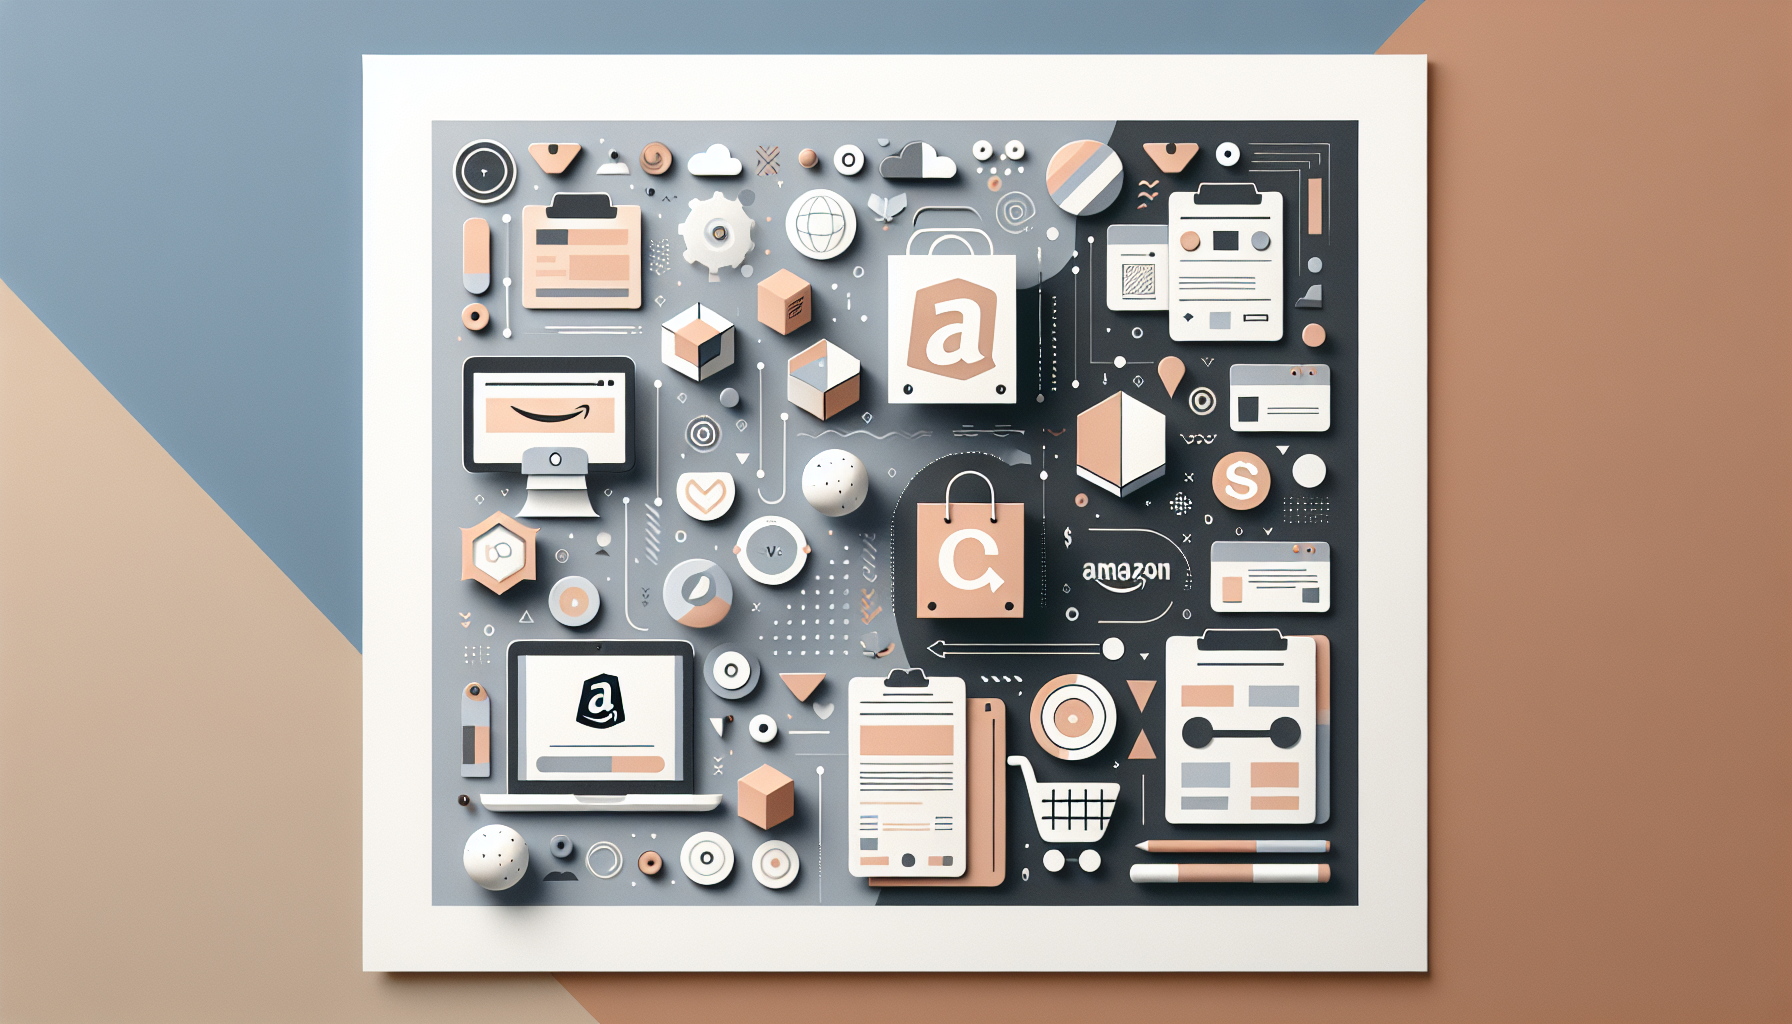 Shopify vs Amazon: Choosing the Right E-commerce Platform for Your Business